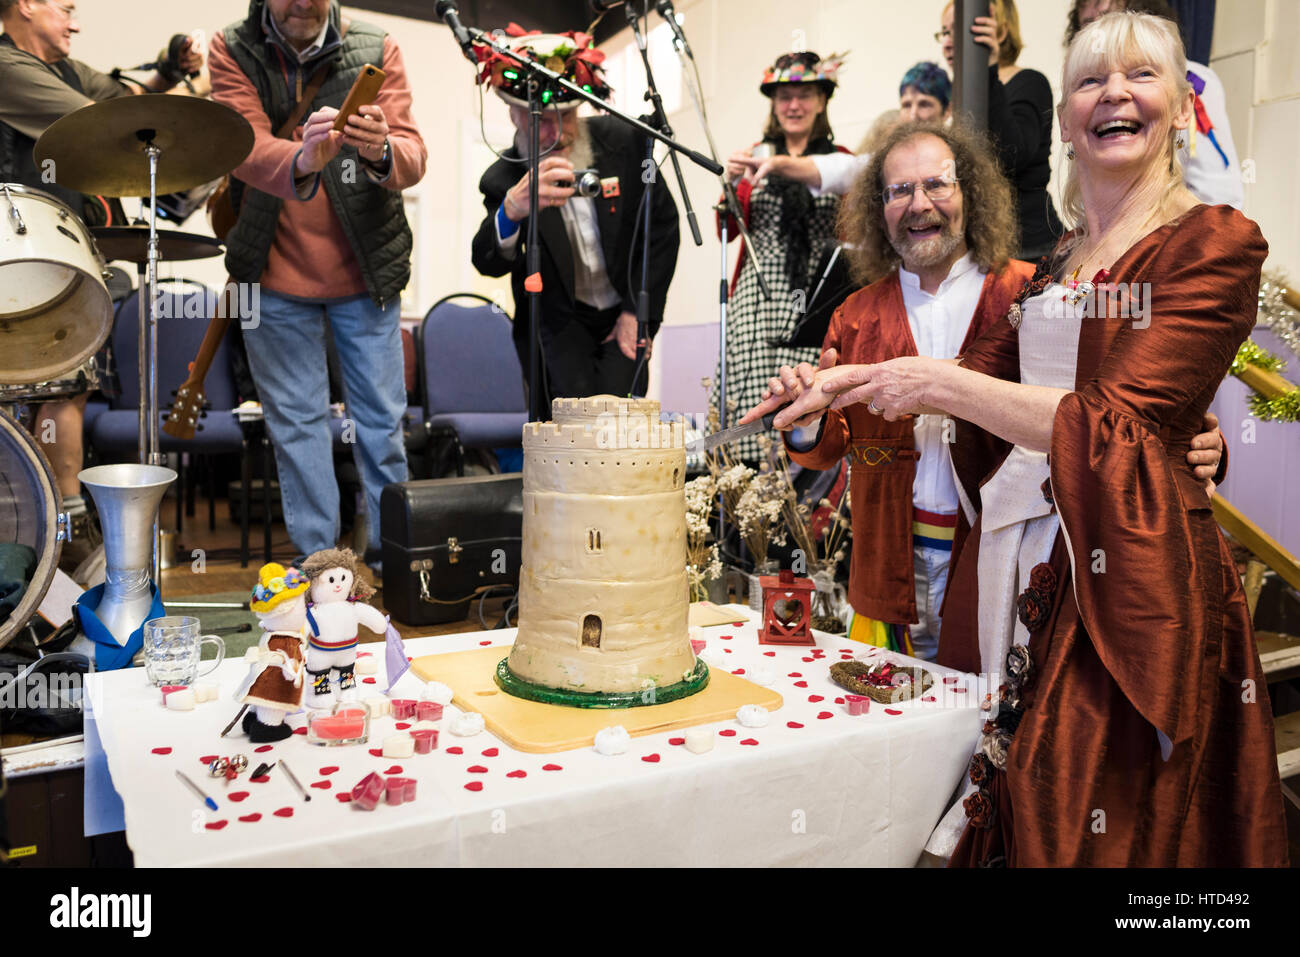 Newly-wed Morris dancing couple cutting the cake at their wedding reception (cake inspired by the great keep of Pembroke castle in Wales). Stock Photo